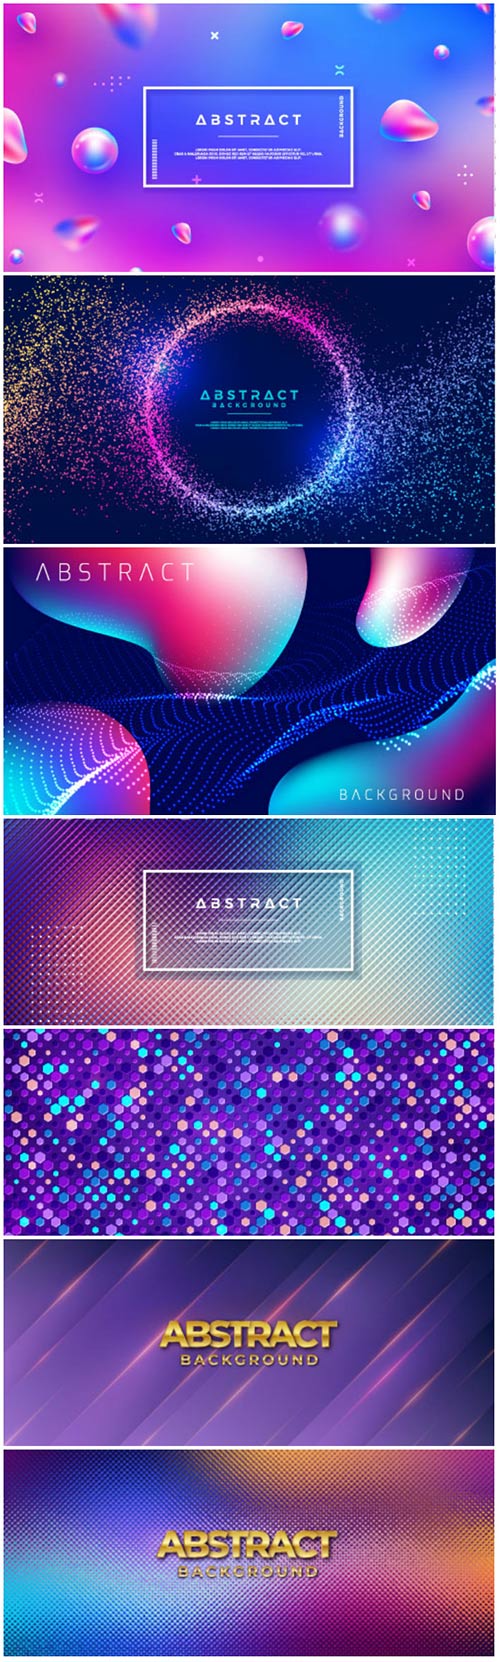 Colorful background with 3D style